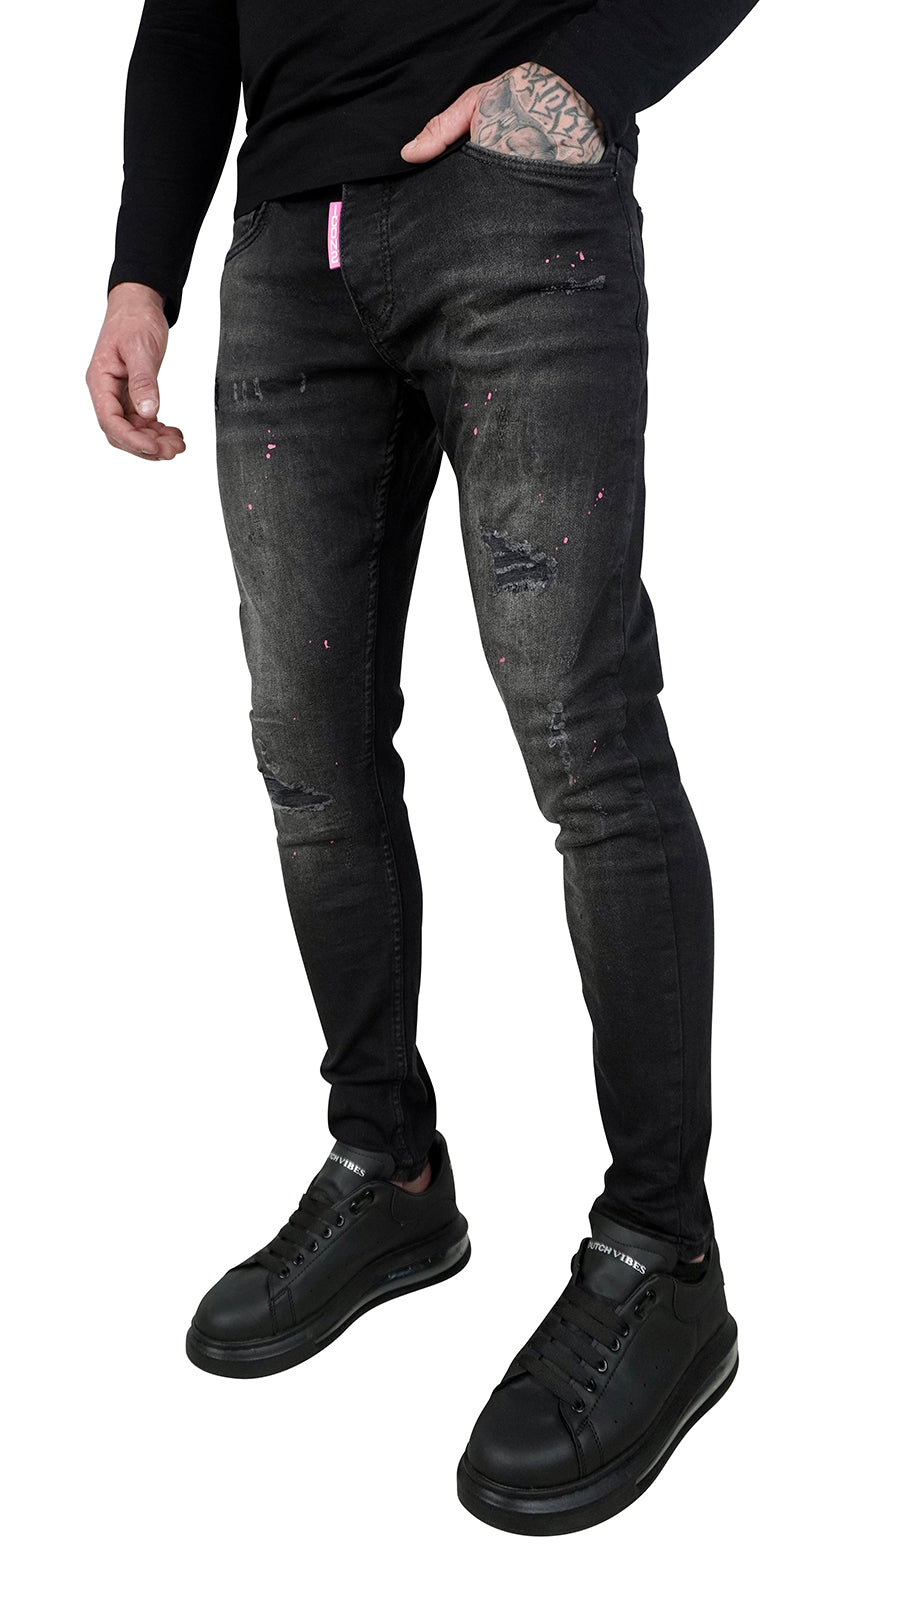 THE ICON PINK SPATTED JEANS - DARK GREY